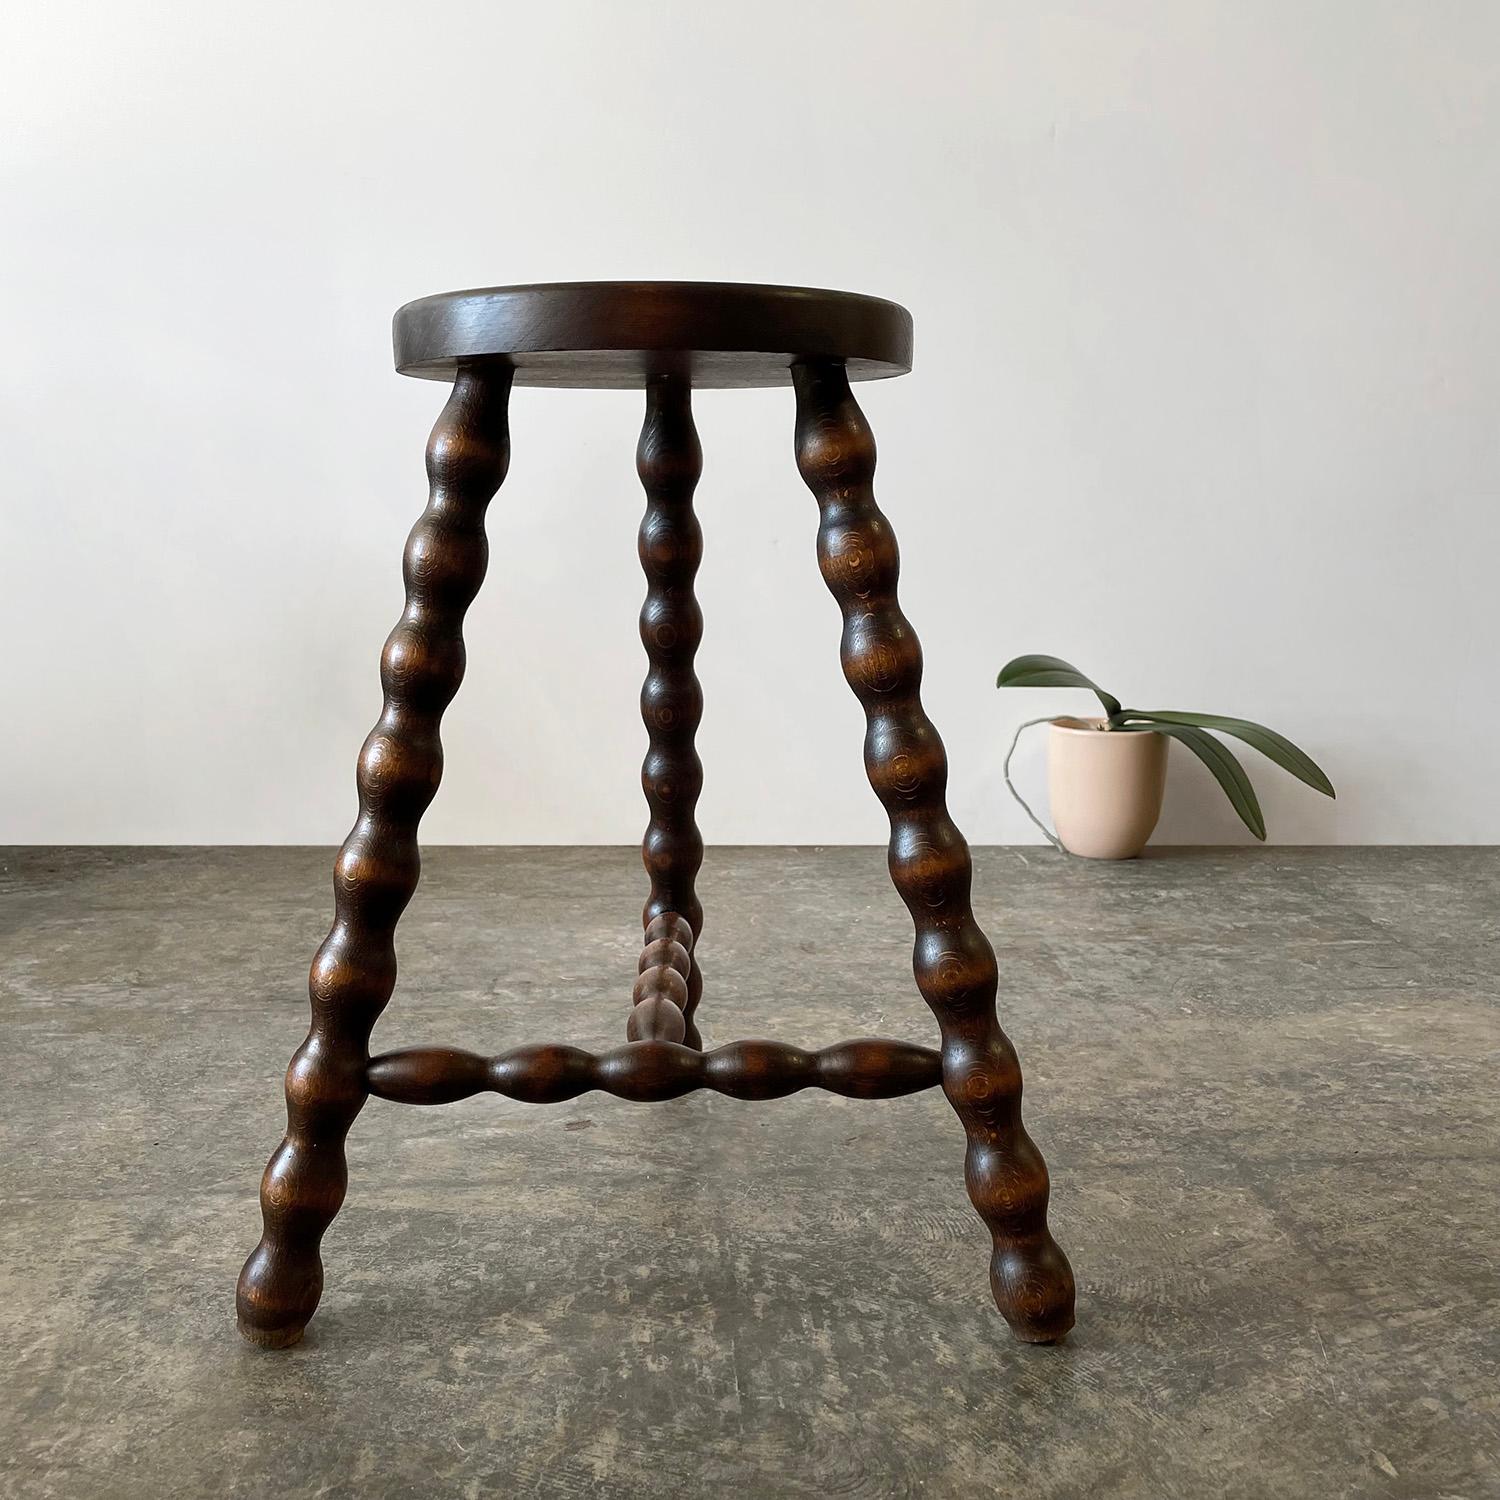 French wood tripod stool
France, mid-century
Can be used as a stool or side table
Circular seat with whimsical turned wood tripod legs
Original wood finish with lovely grain detail
Patina from age and use
Second stool available, sold